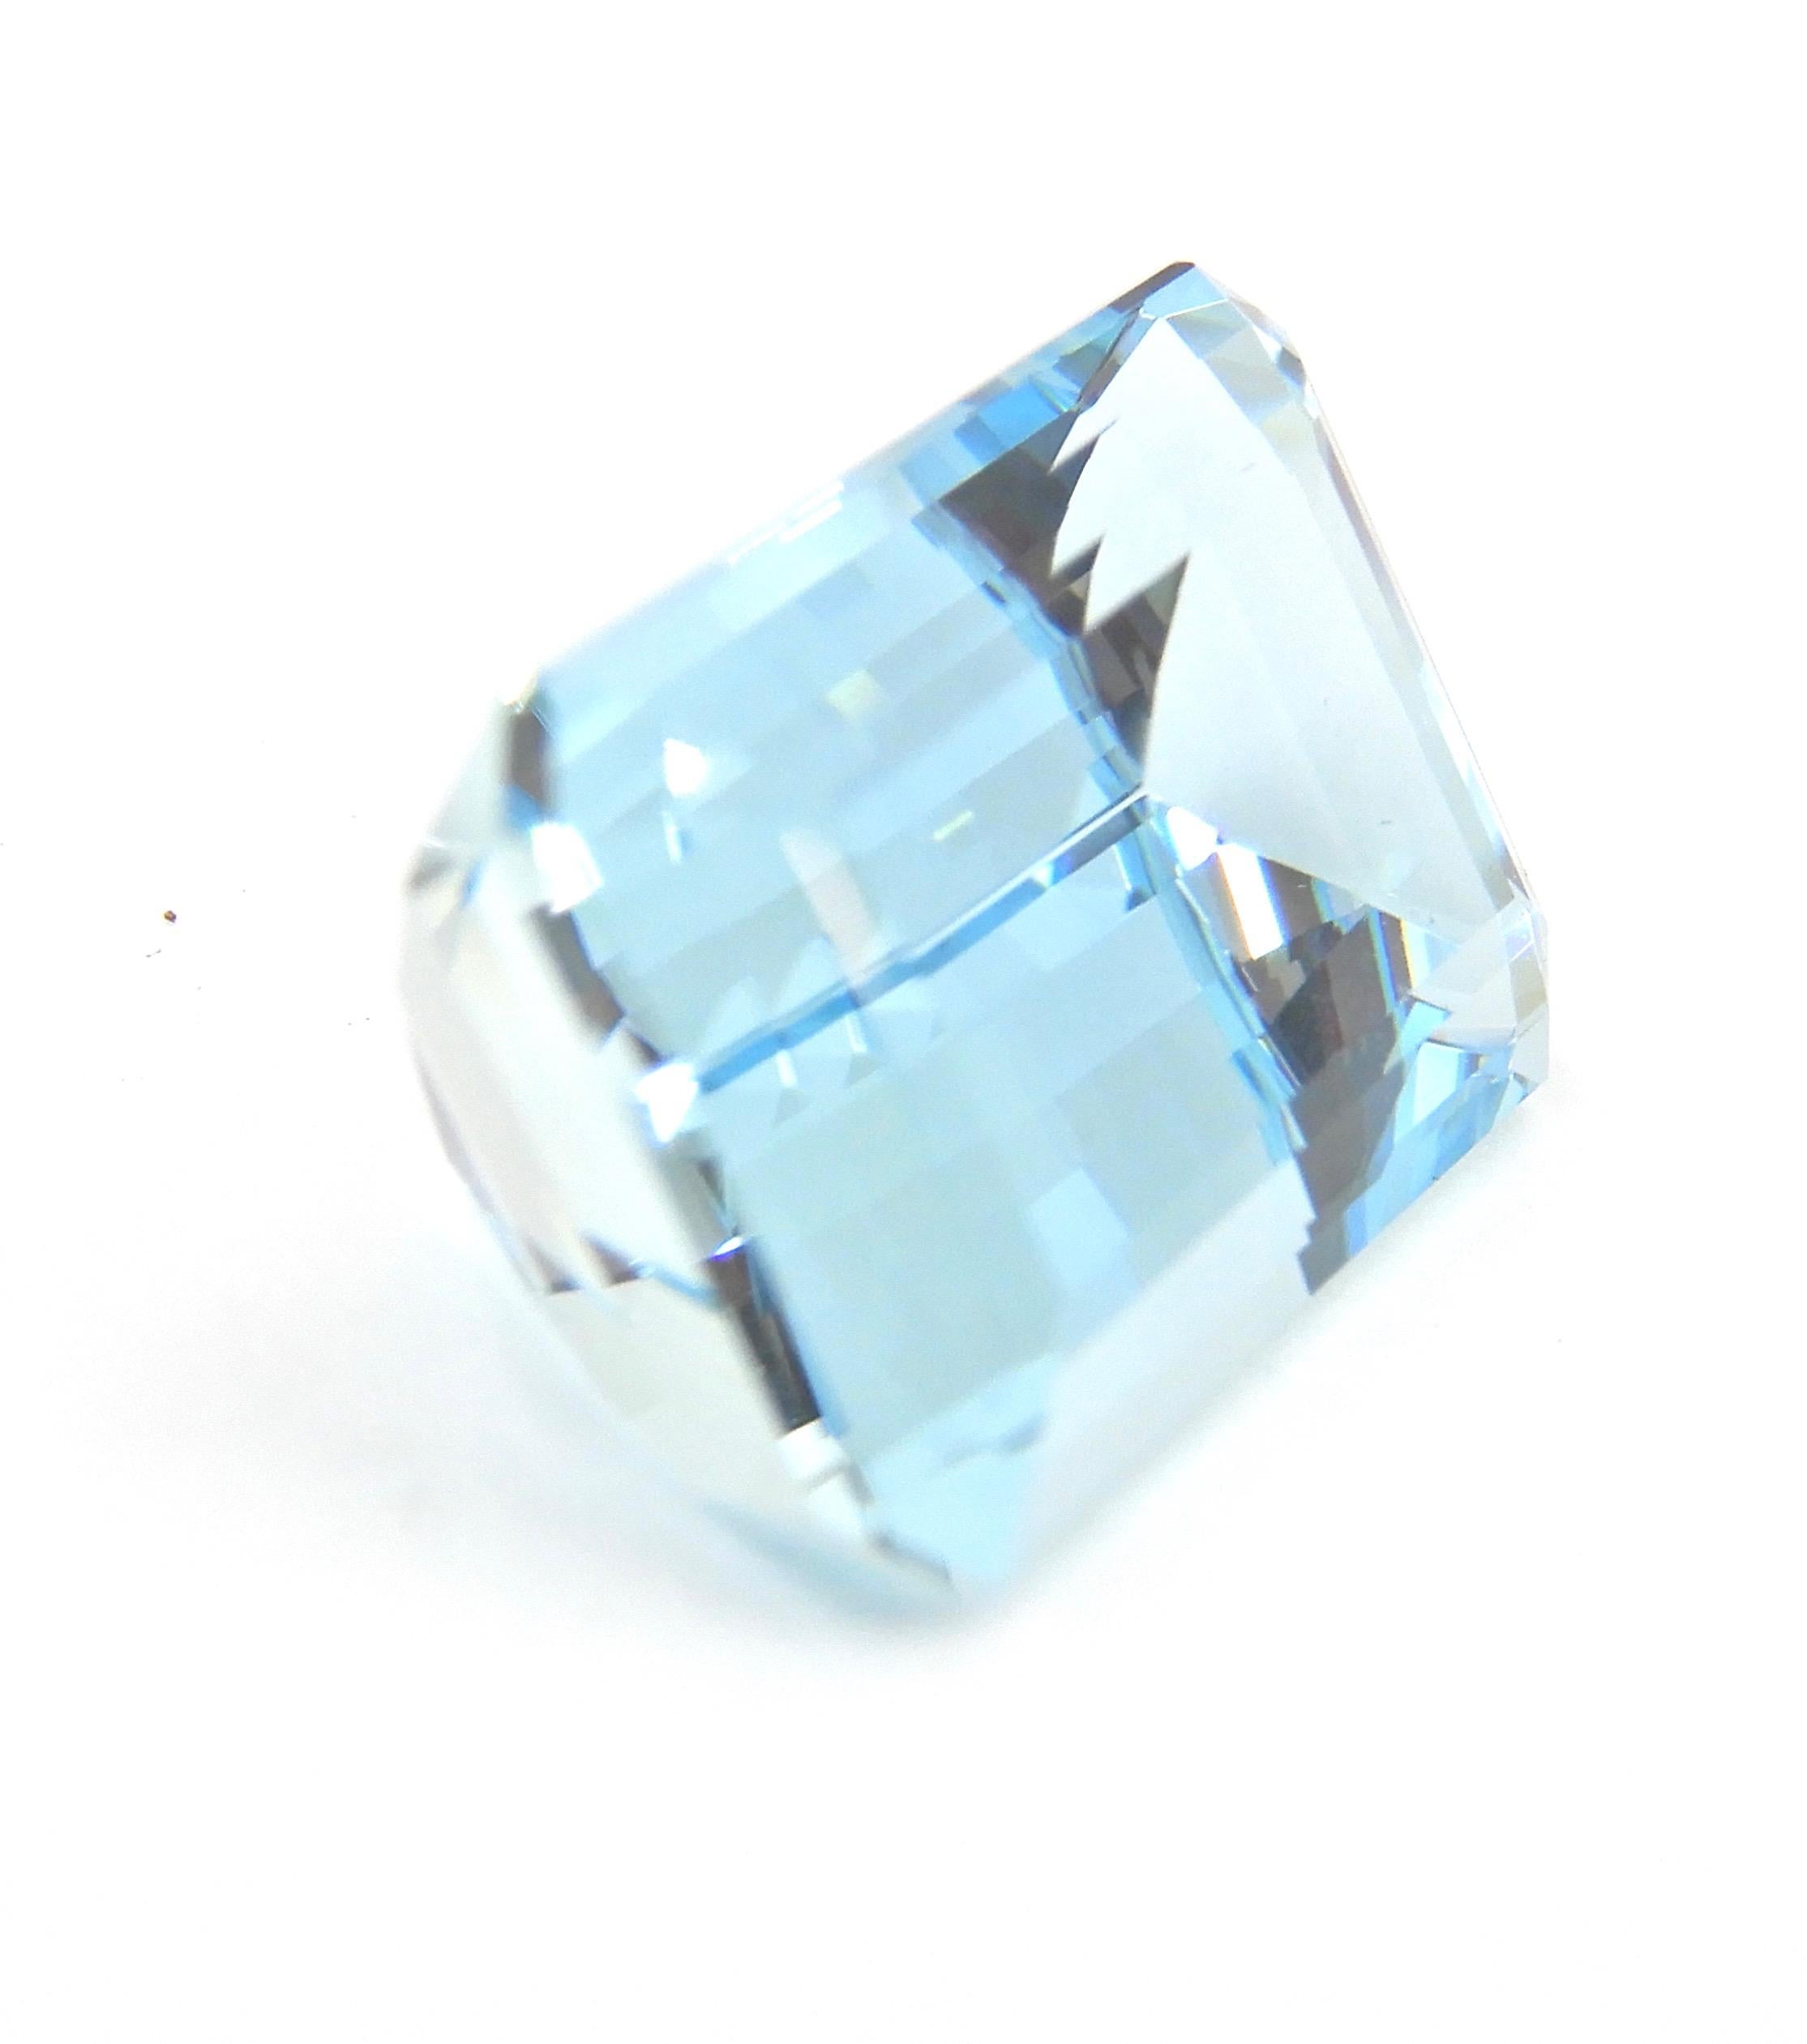 Imagine your dream ring or pendant set with this beautiful 8.49 Carat Emerald Cut Aquamarine Loose Gemstone. Cut with beautiful proportions, this gemstone is irresistible. 

I can create the ring you have always wanted, be it an art deco style or a